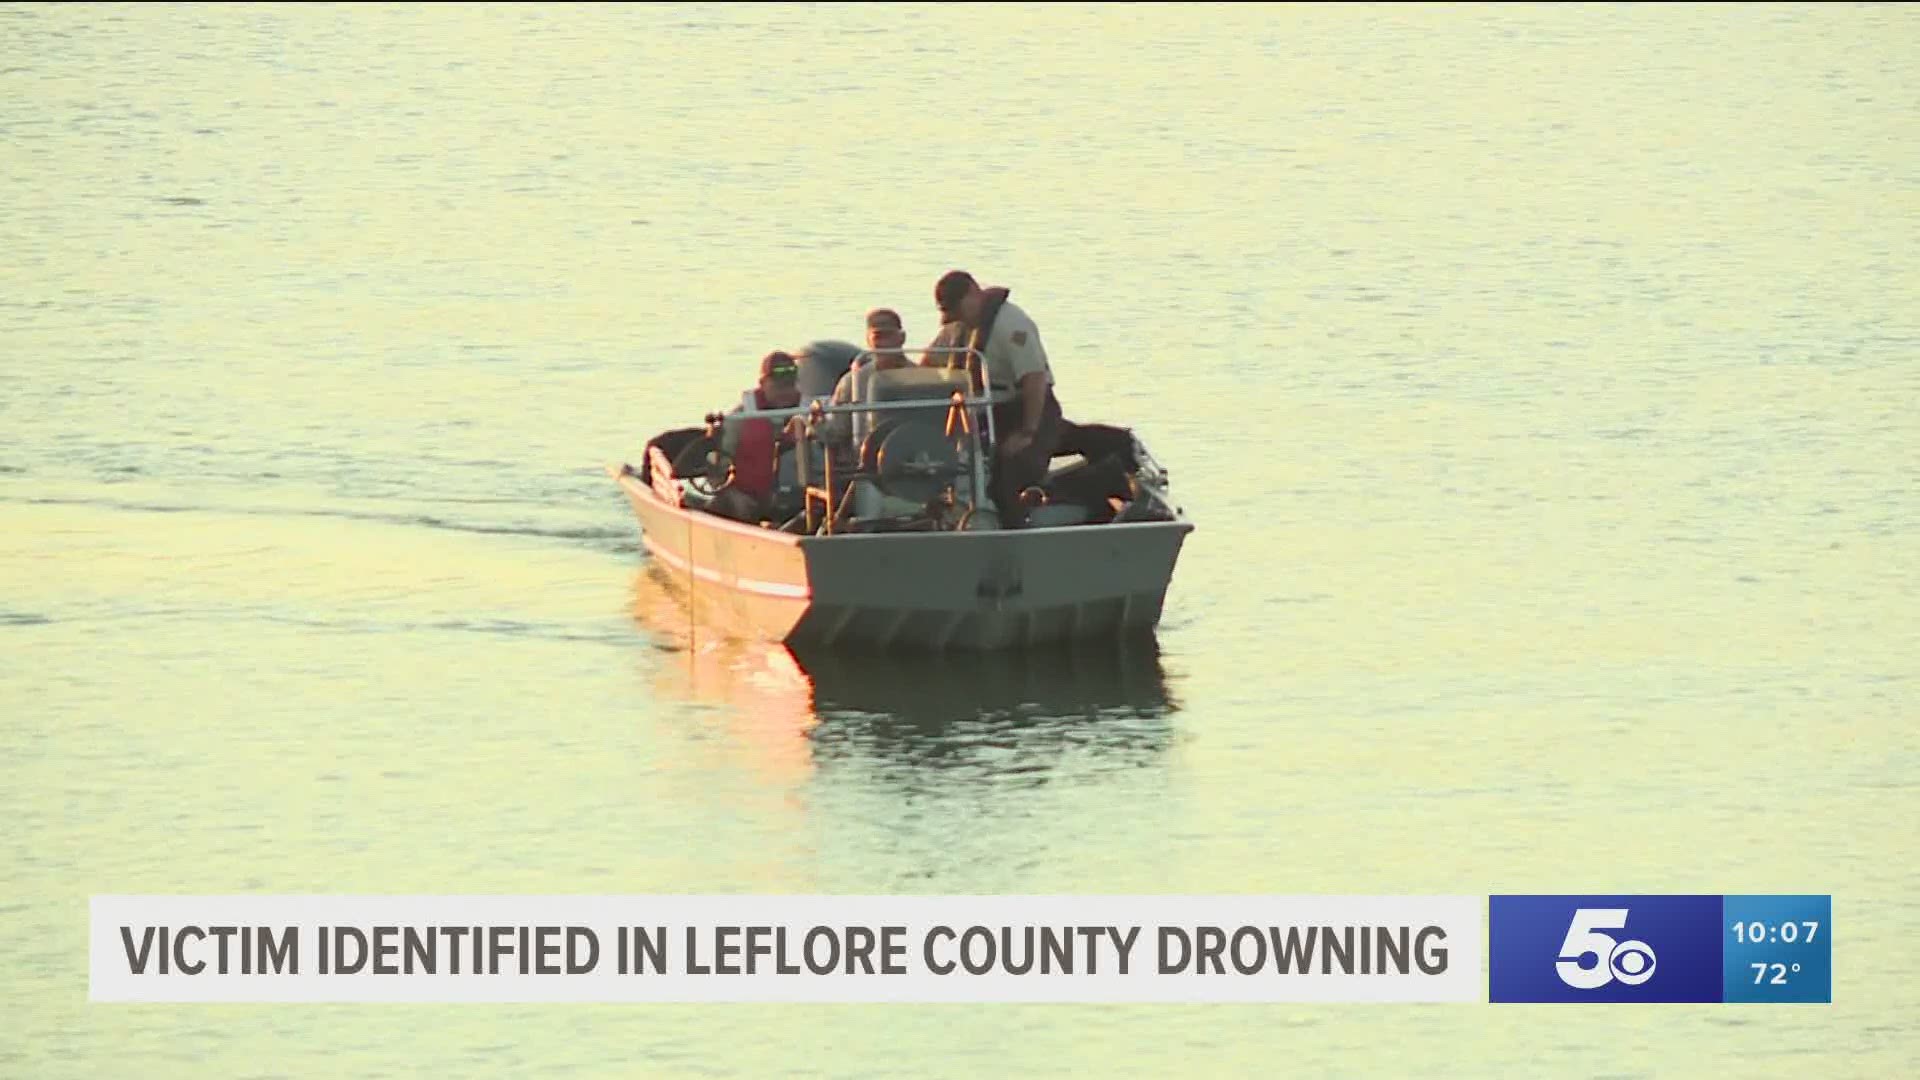 Victim identified in Leflore County drowning